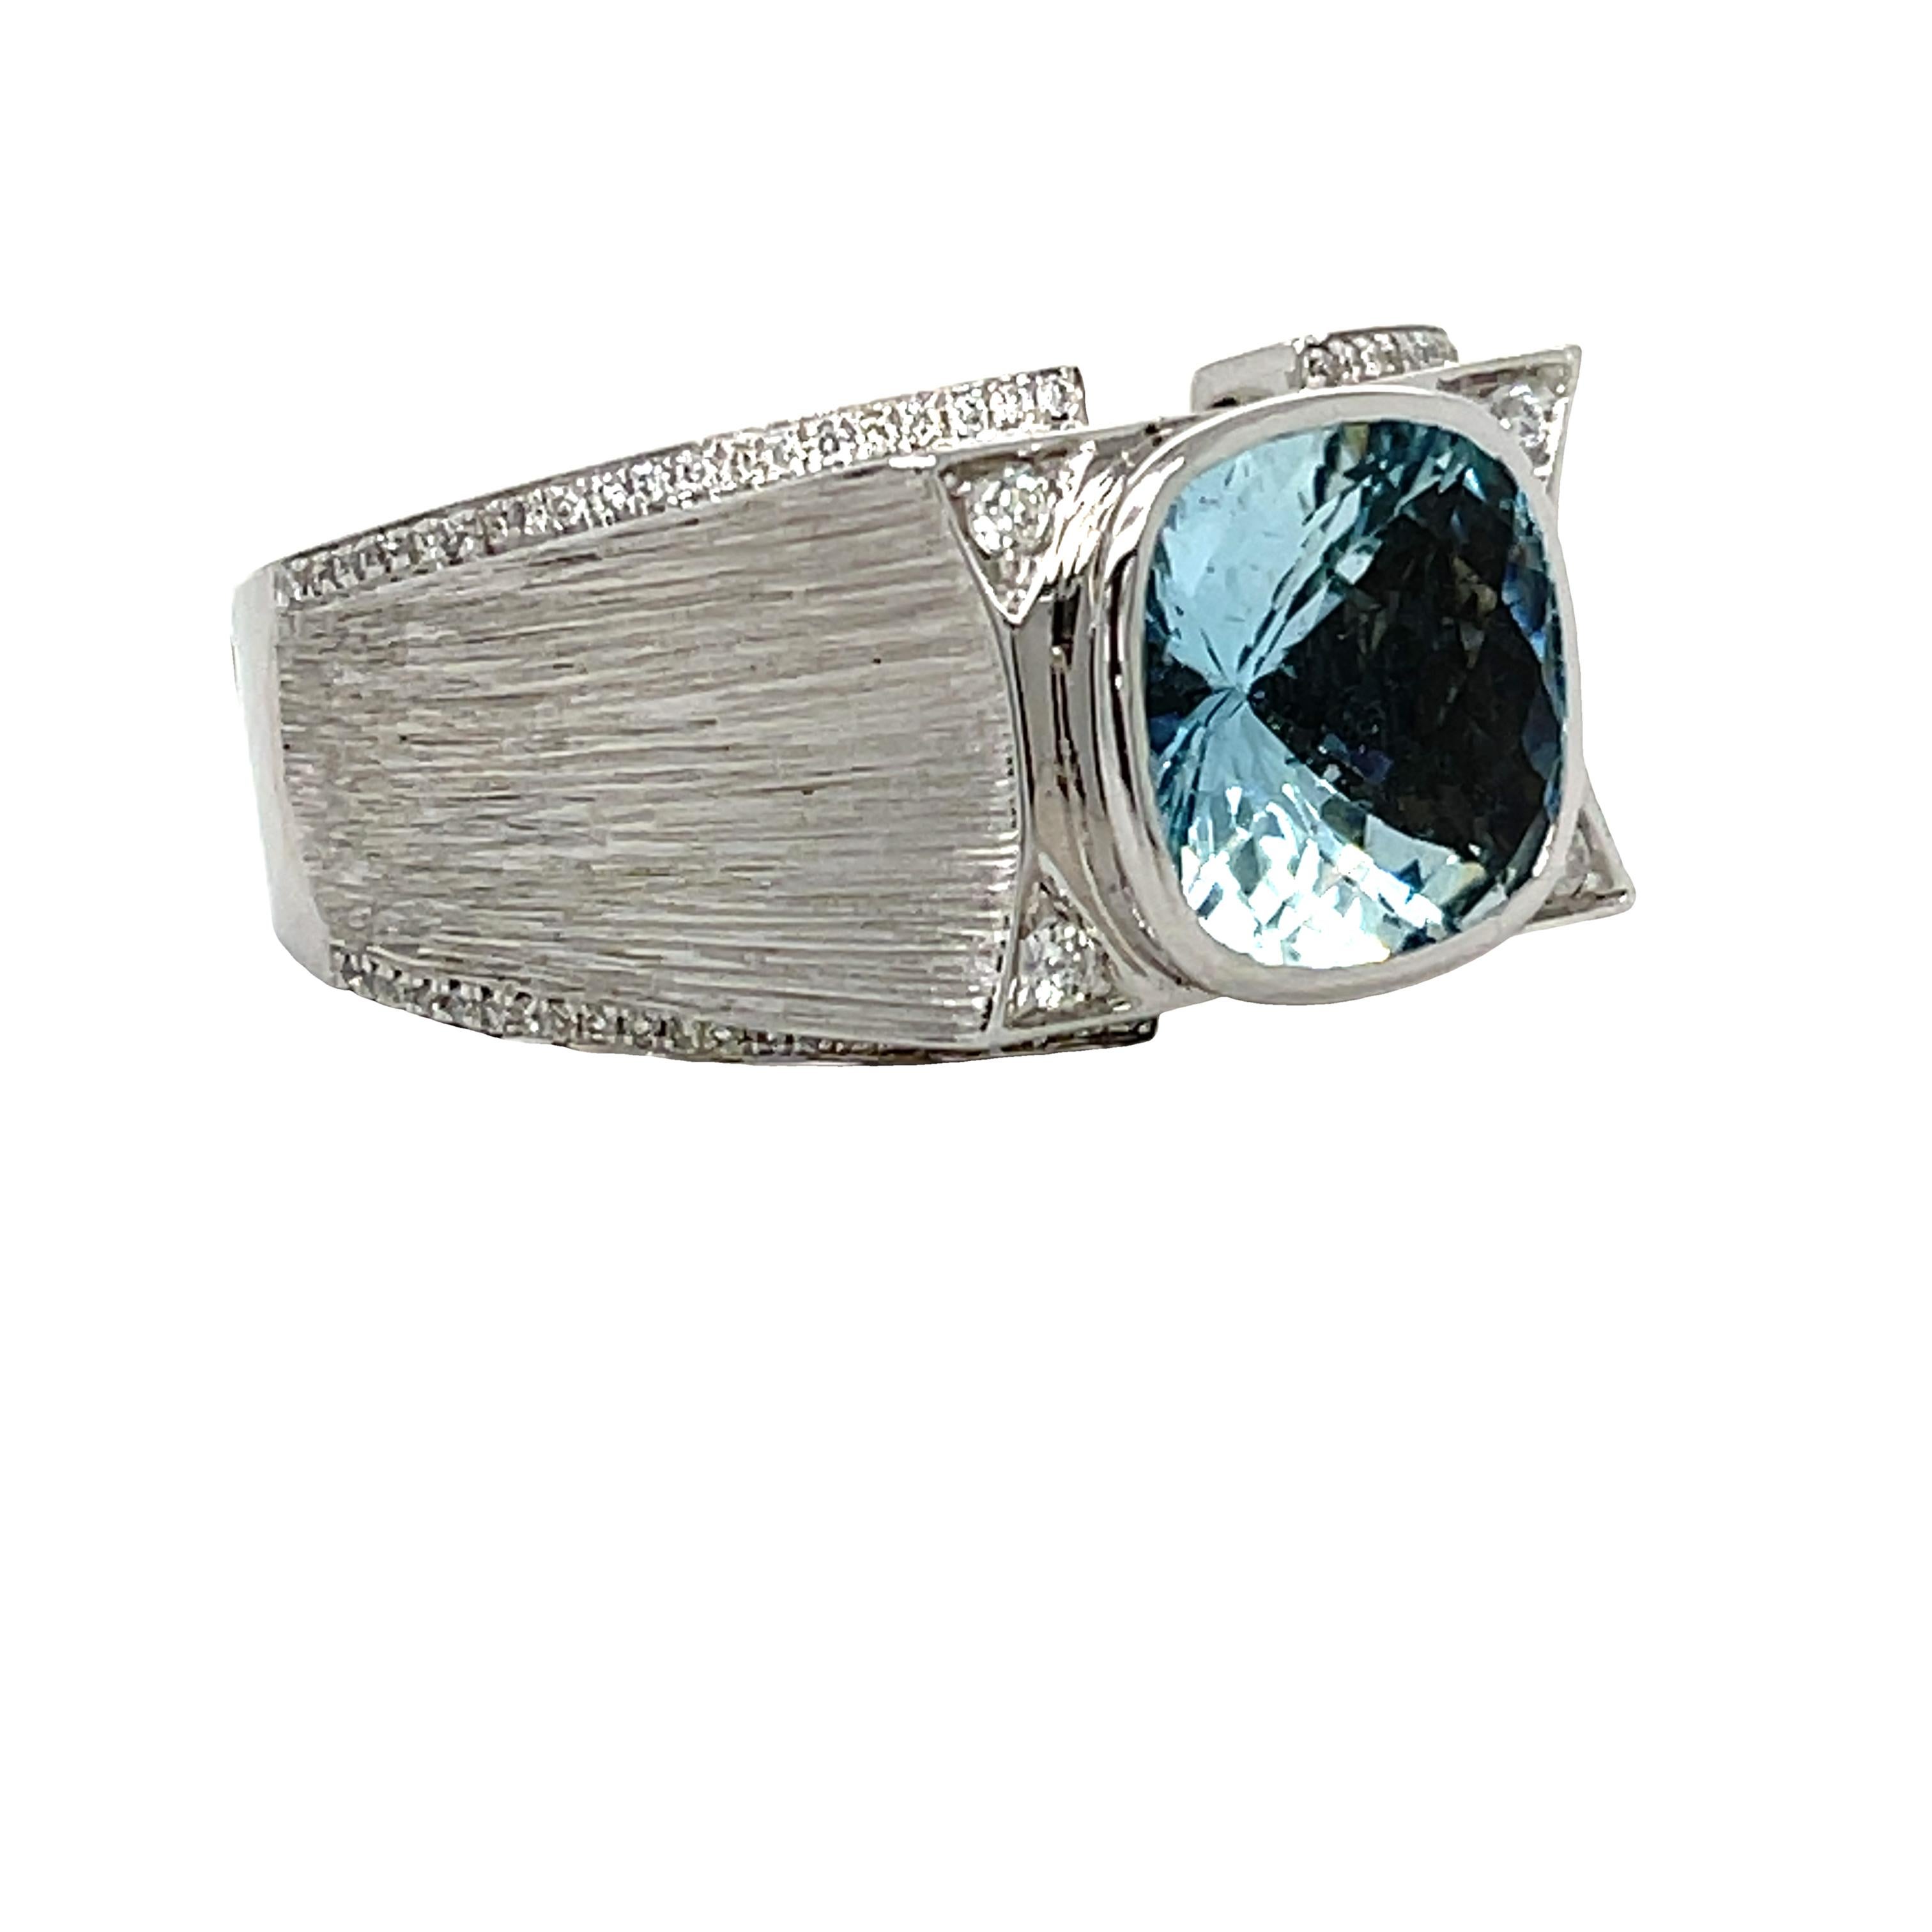 This unique Men's ring has a vibrant blue top quality cushion checkerboard Aquamarine center bezel set in 14K white gold. There are 88 brilliant cut diamonds on the shank. It comes in a beautiful box ready for the perfect gift!

14KW:           